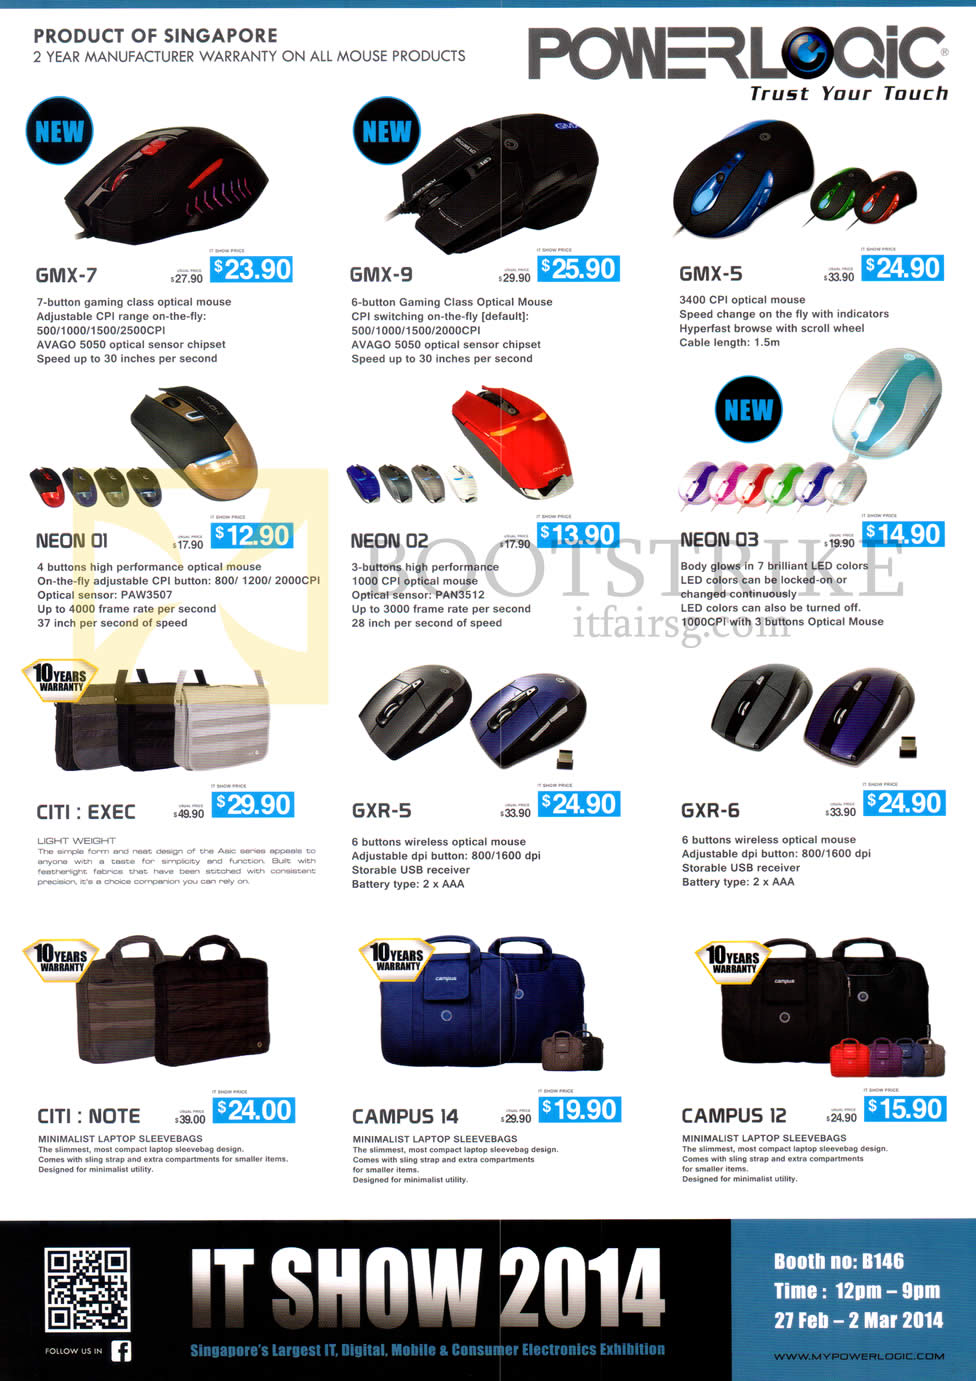 IT SHOW 2014 price list image brochure of Leap Frog Powerlogic Mouse Bags GMX-7, GMX-9, GMX-5, Meon O1, Meon )2, Meon 03, Citi Exec, GXR-5, GXR-6, Citi-Note, Camps 14, Campus 12